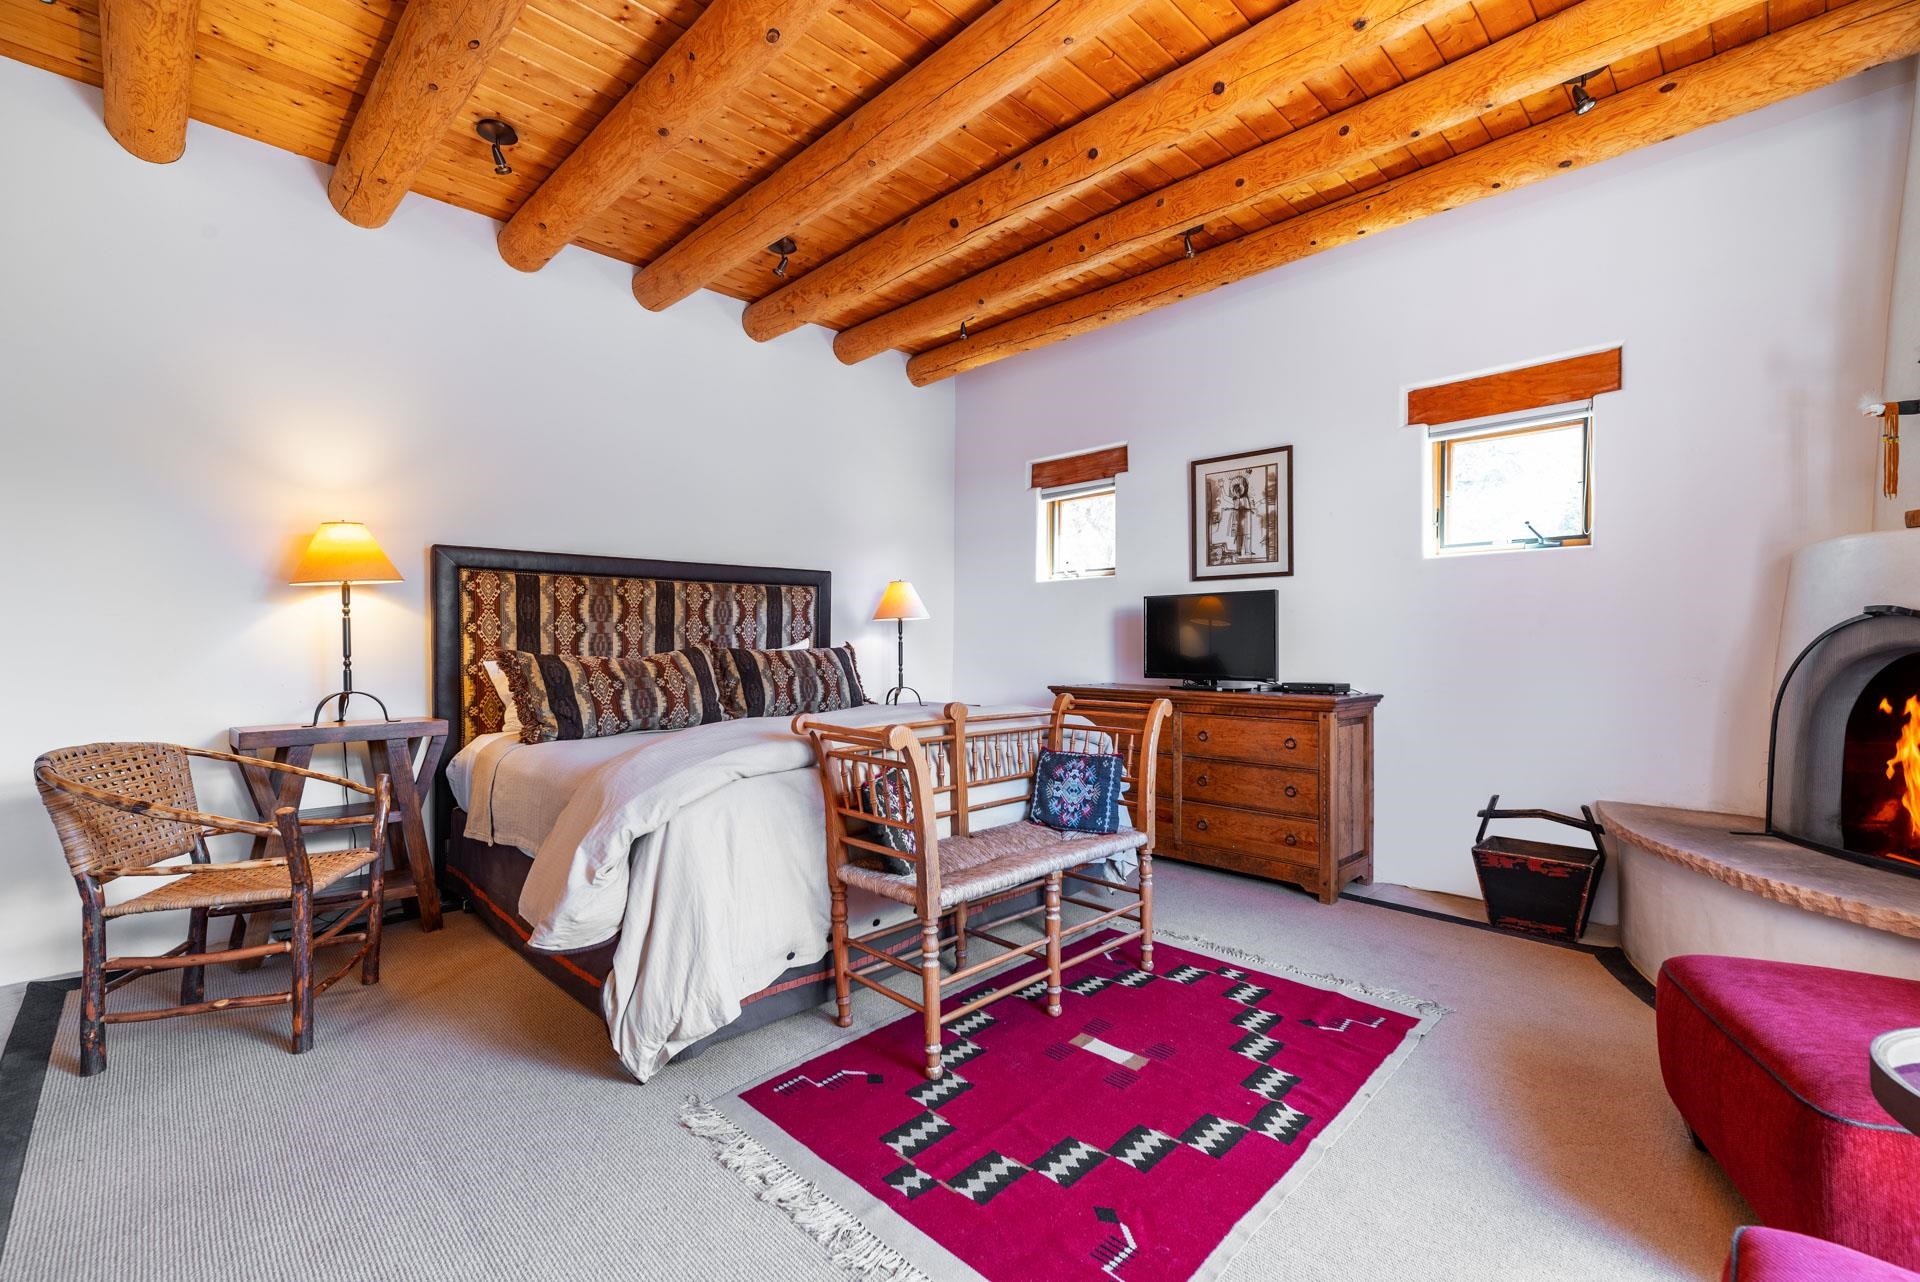 38 LODGE 38 M, Santa Fe, New Mexico 87506, 2 Bedrooms Bedrooms, ,2 BathroomsBathrooms,Residential,For Sale,38 LODGE 38 M,202201375